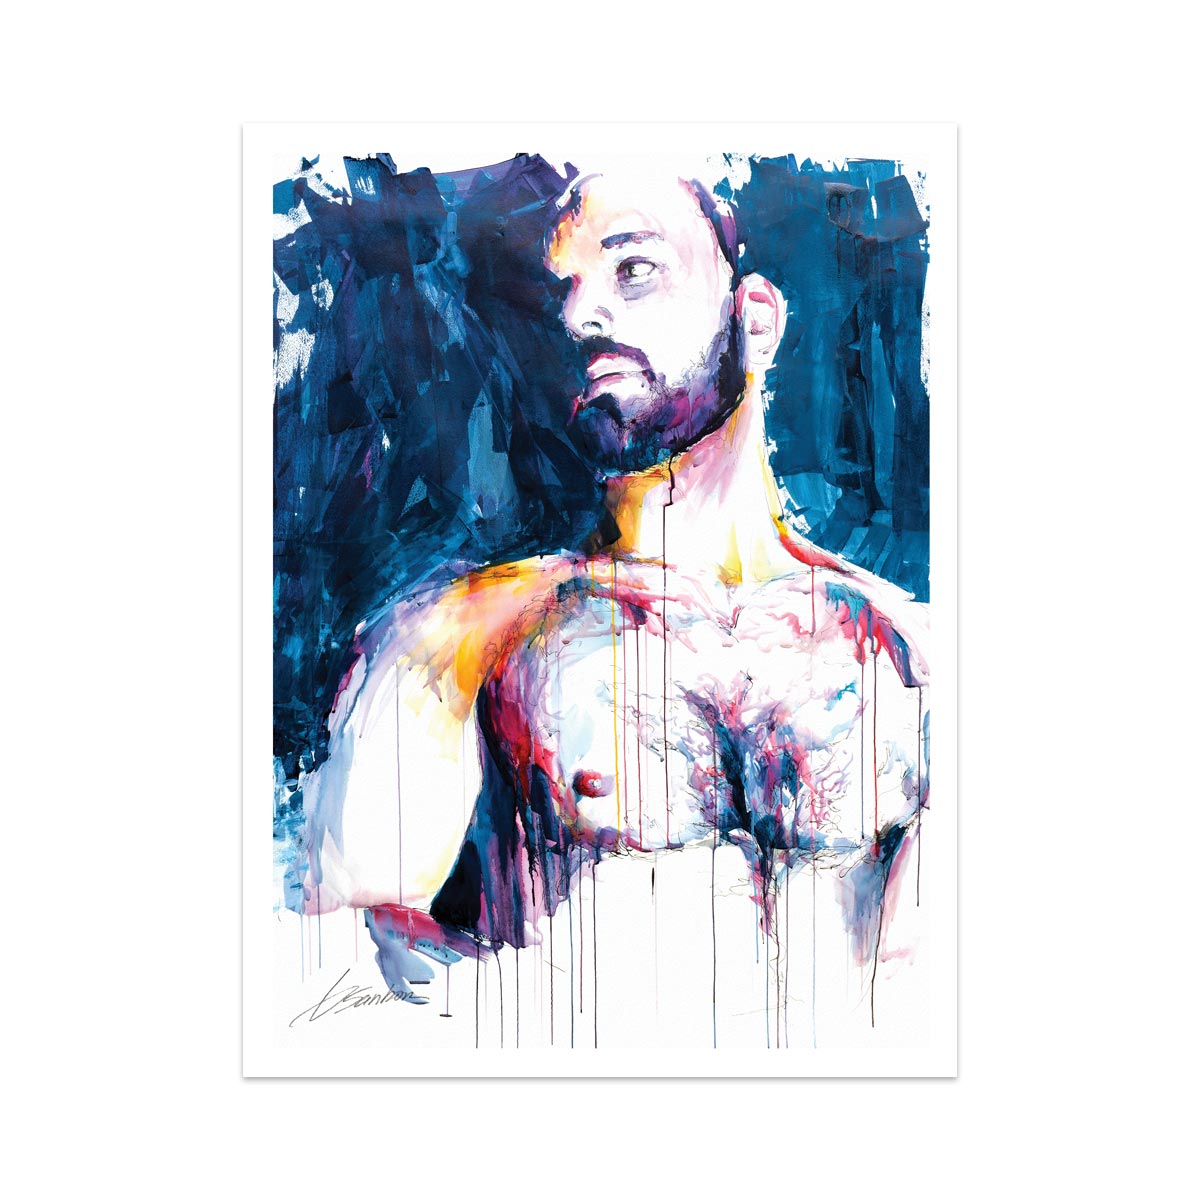 Emergence of a Bearded Adonis - 48x60" Original Watercolor